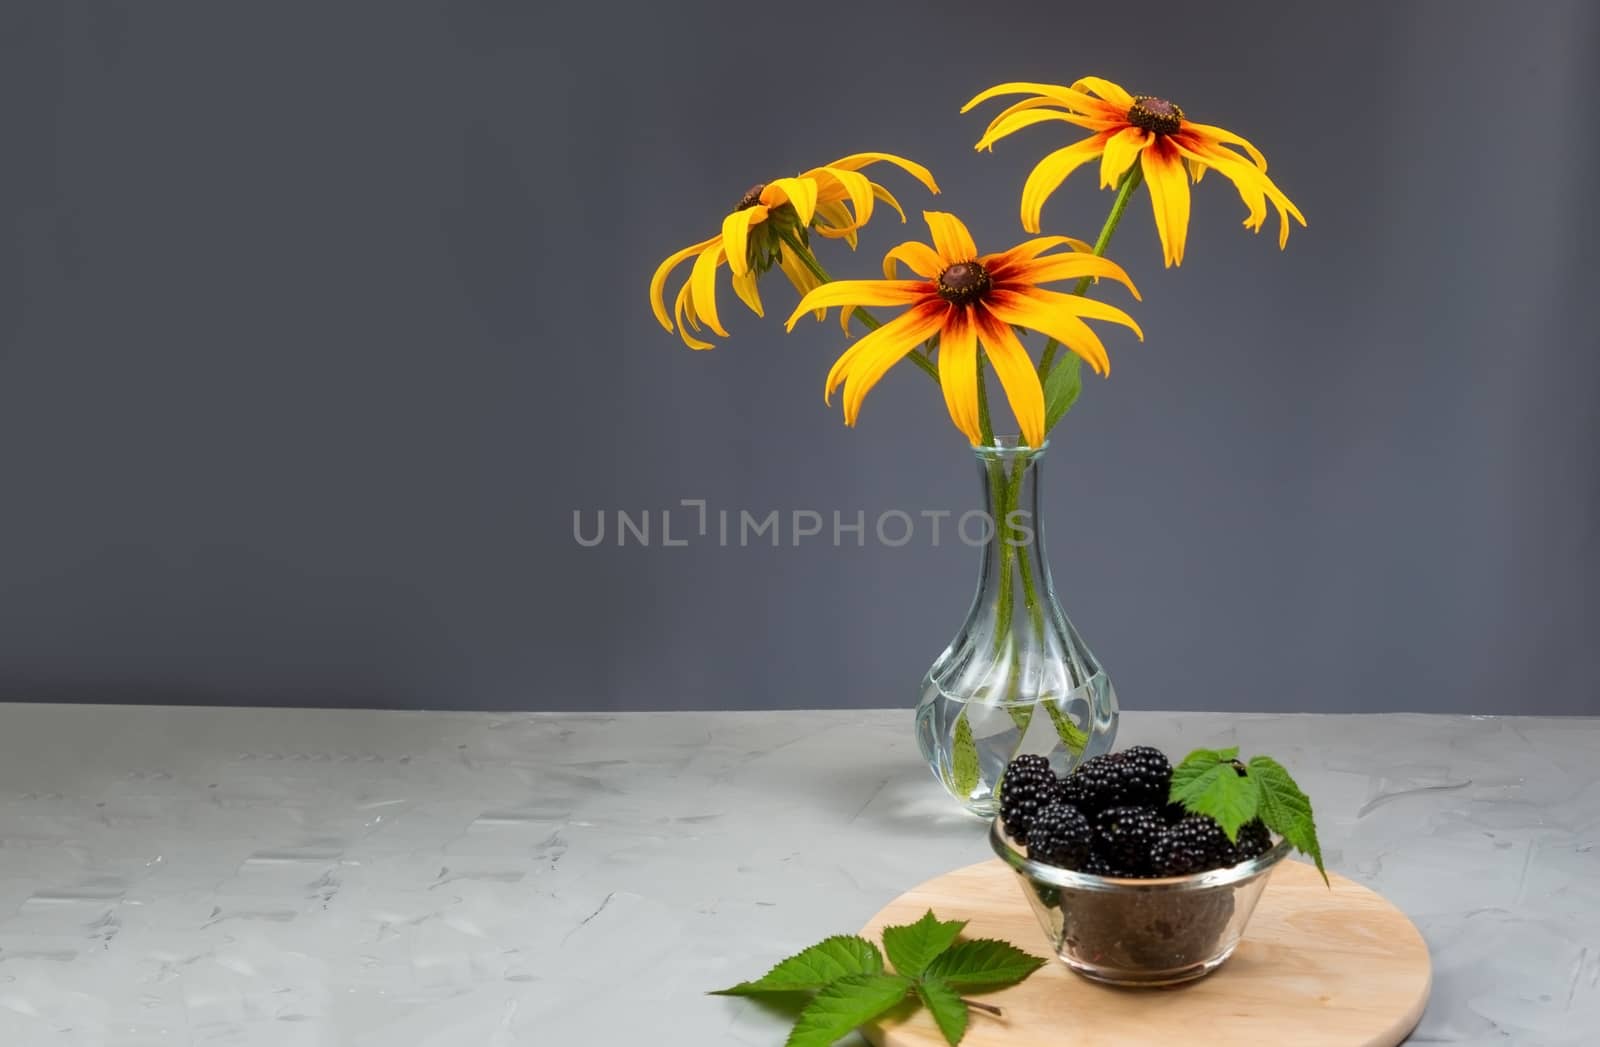 rudbeckia flowers in a transparent vase on a gray concrete table by galinasharapova